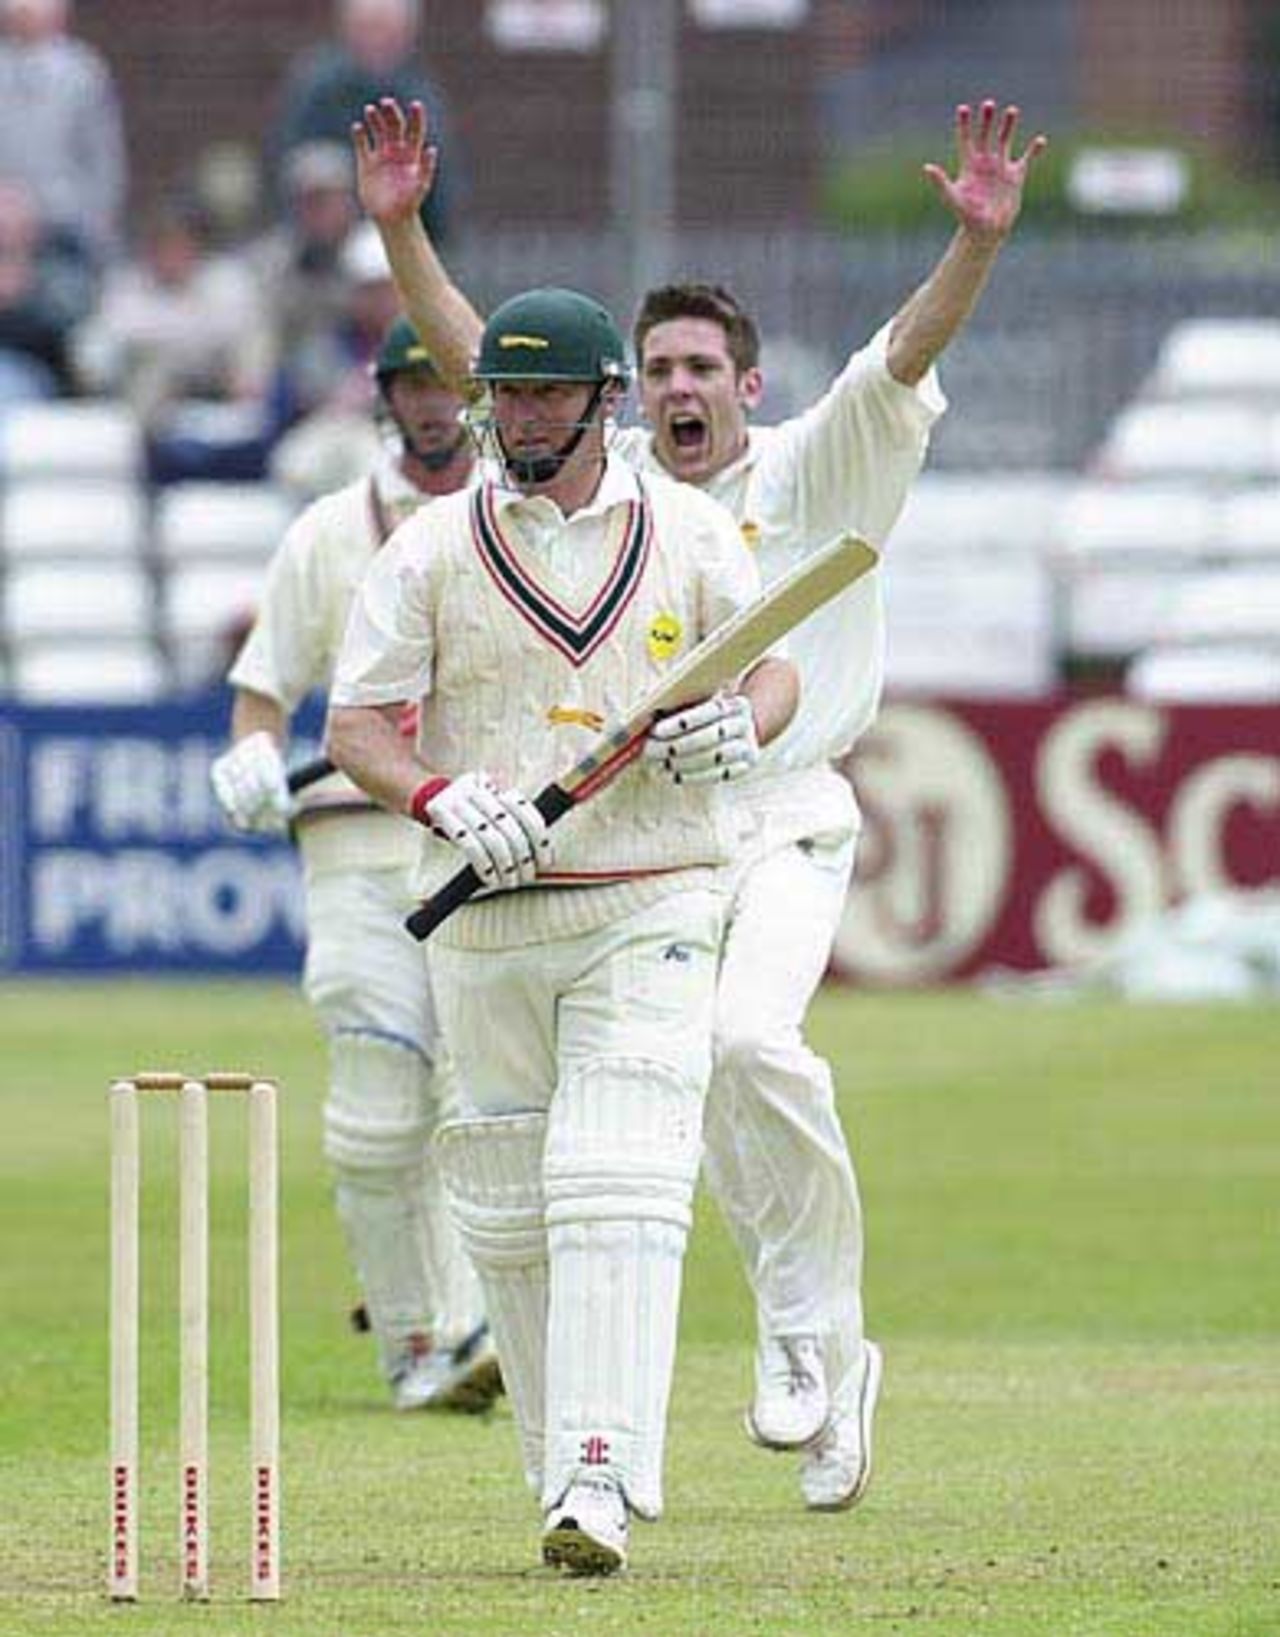 Derbyshire v Leicestershire, Benson and Hedges Cup, Northern Division, 3 May 2002, Racecourse Ground Derby